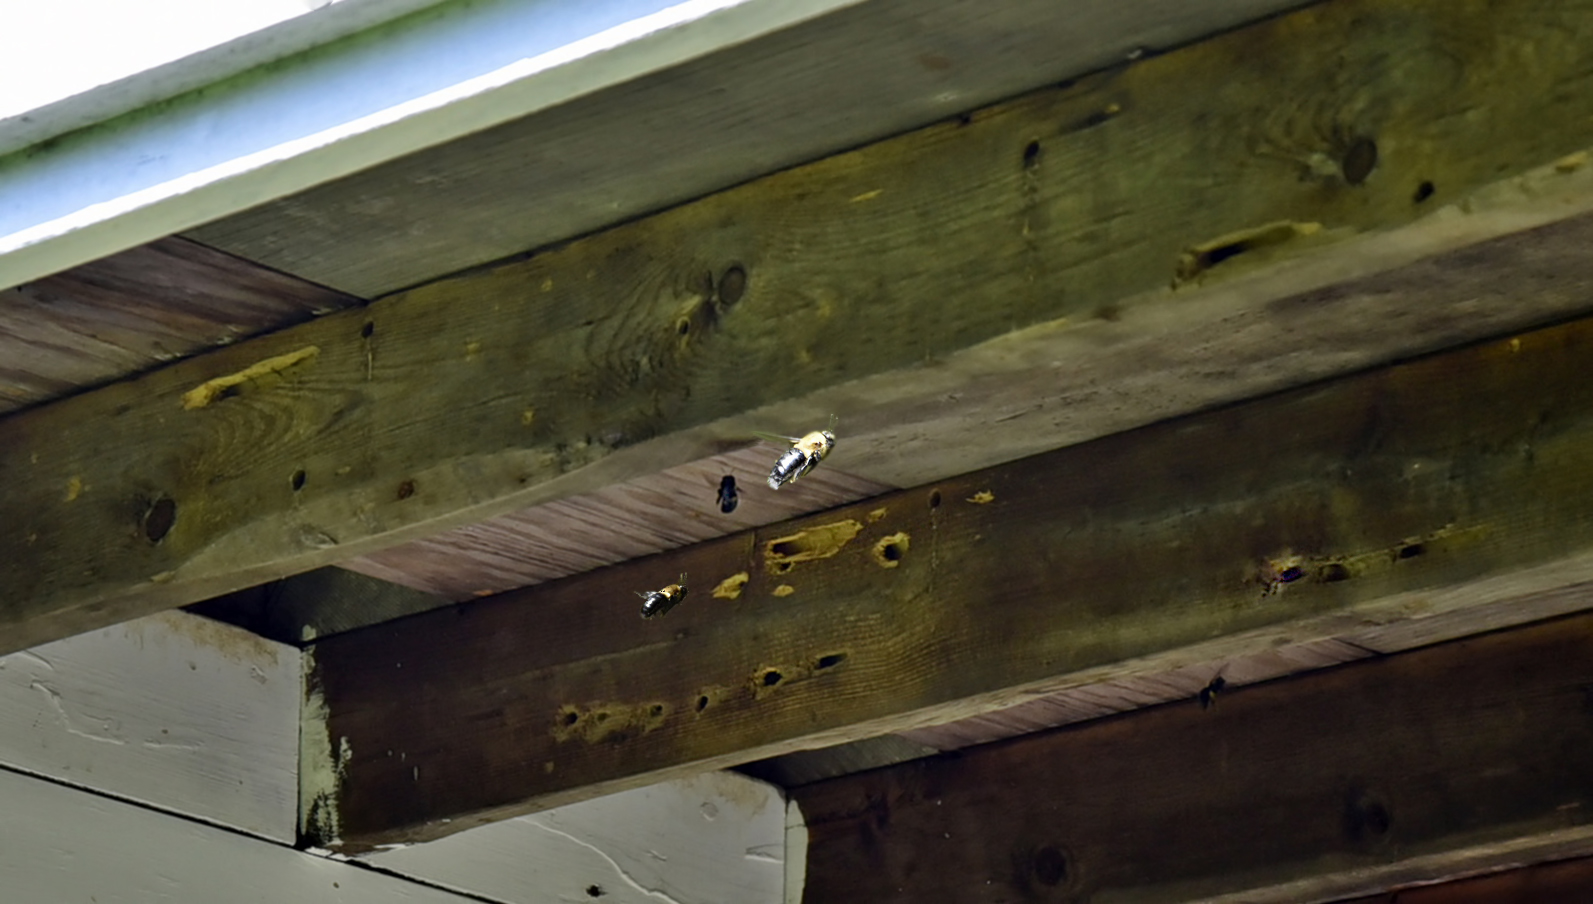 Carpenter bees flyng around nesting gallery entrance